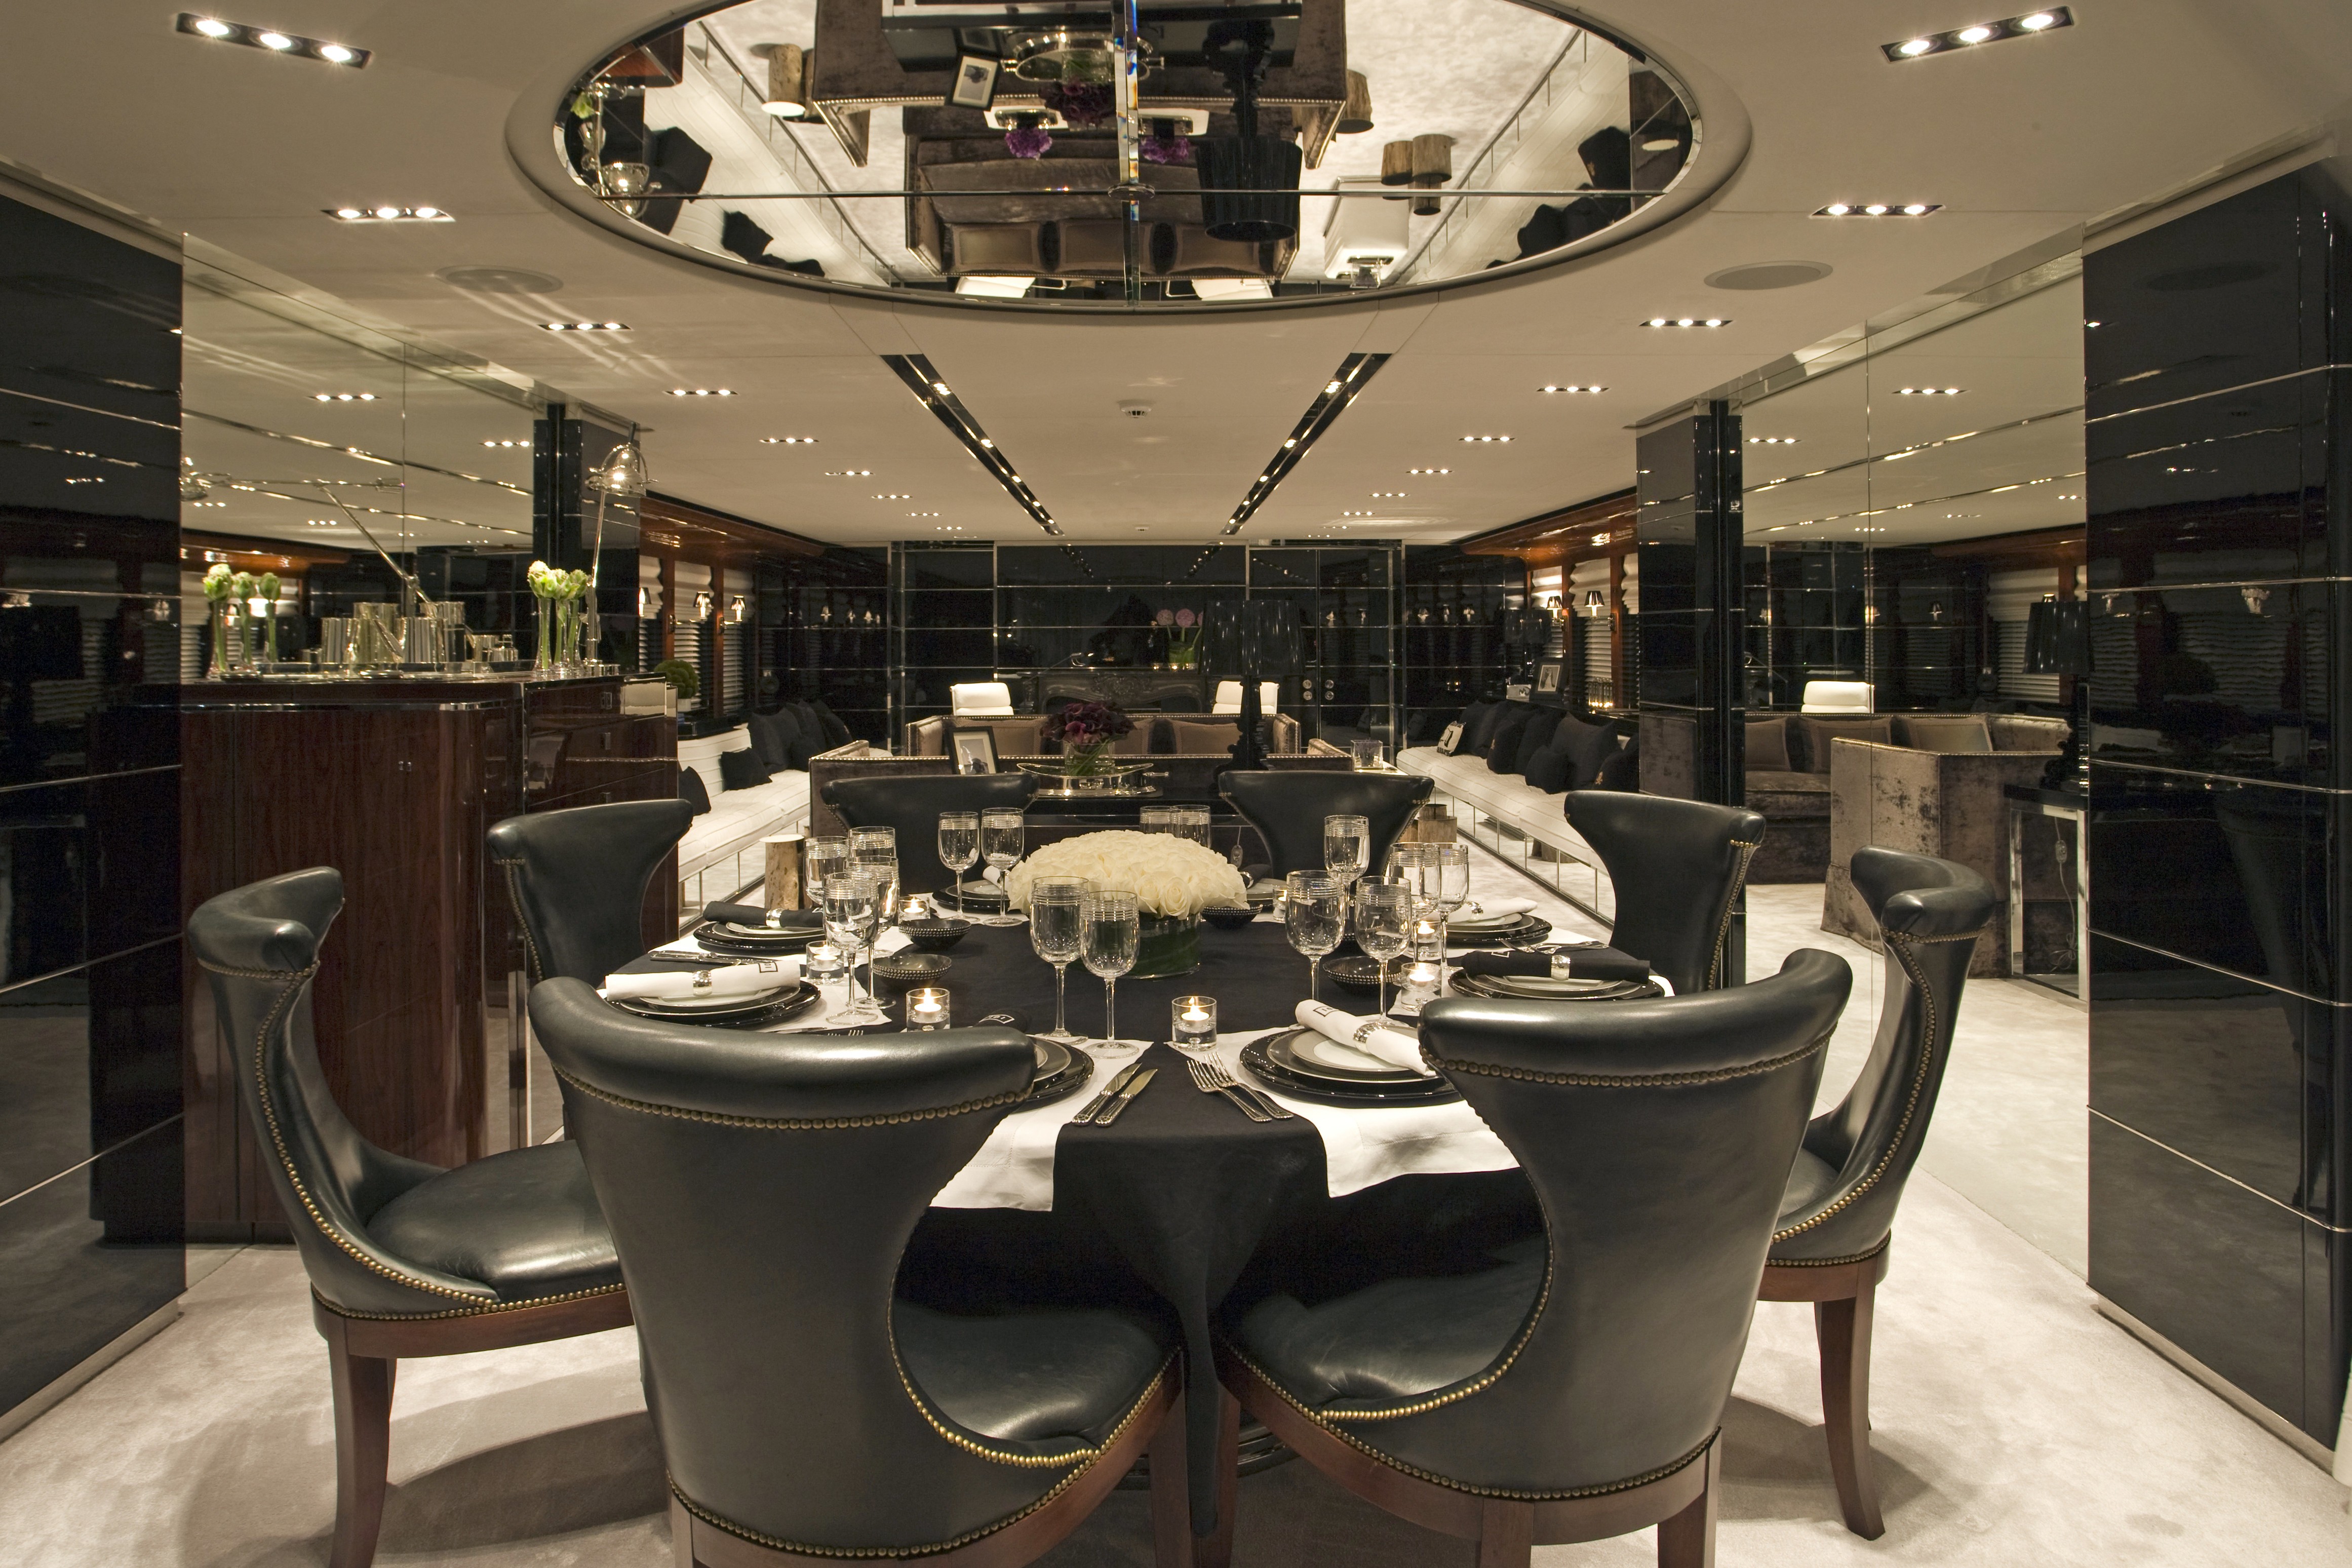 Eating/dining Furniture Aboard Yacht BLISS